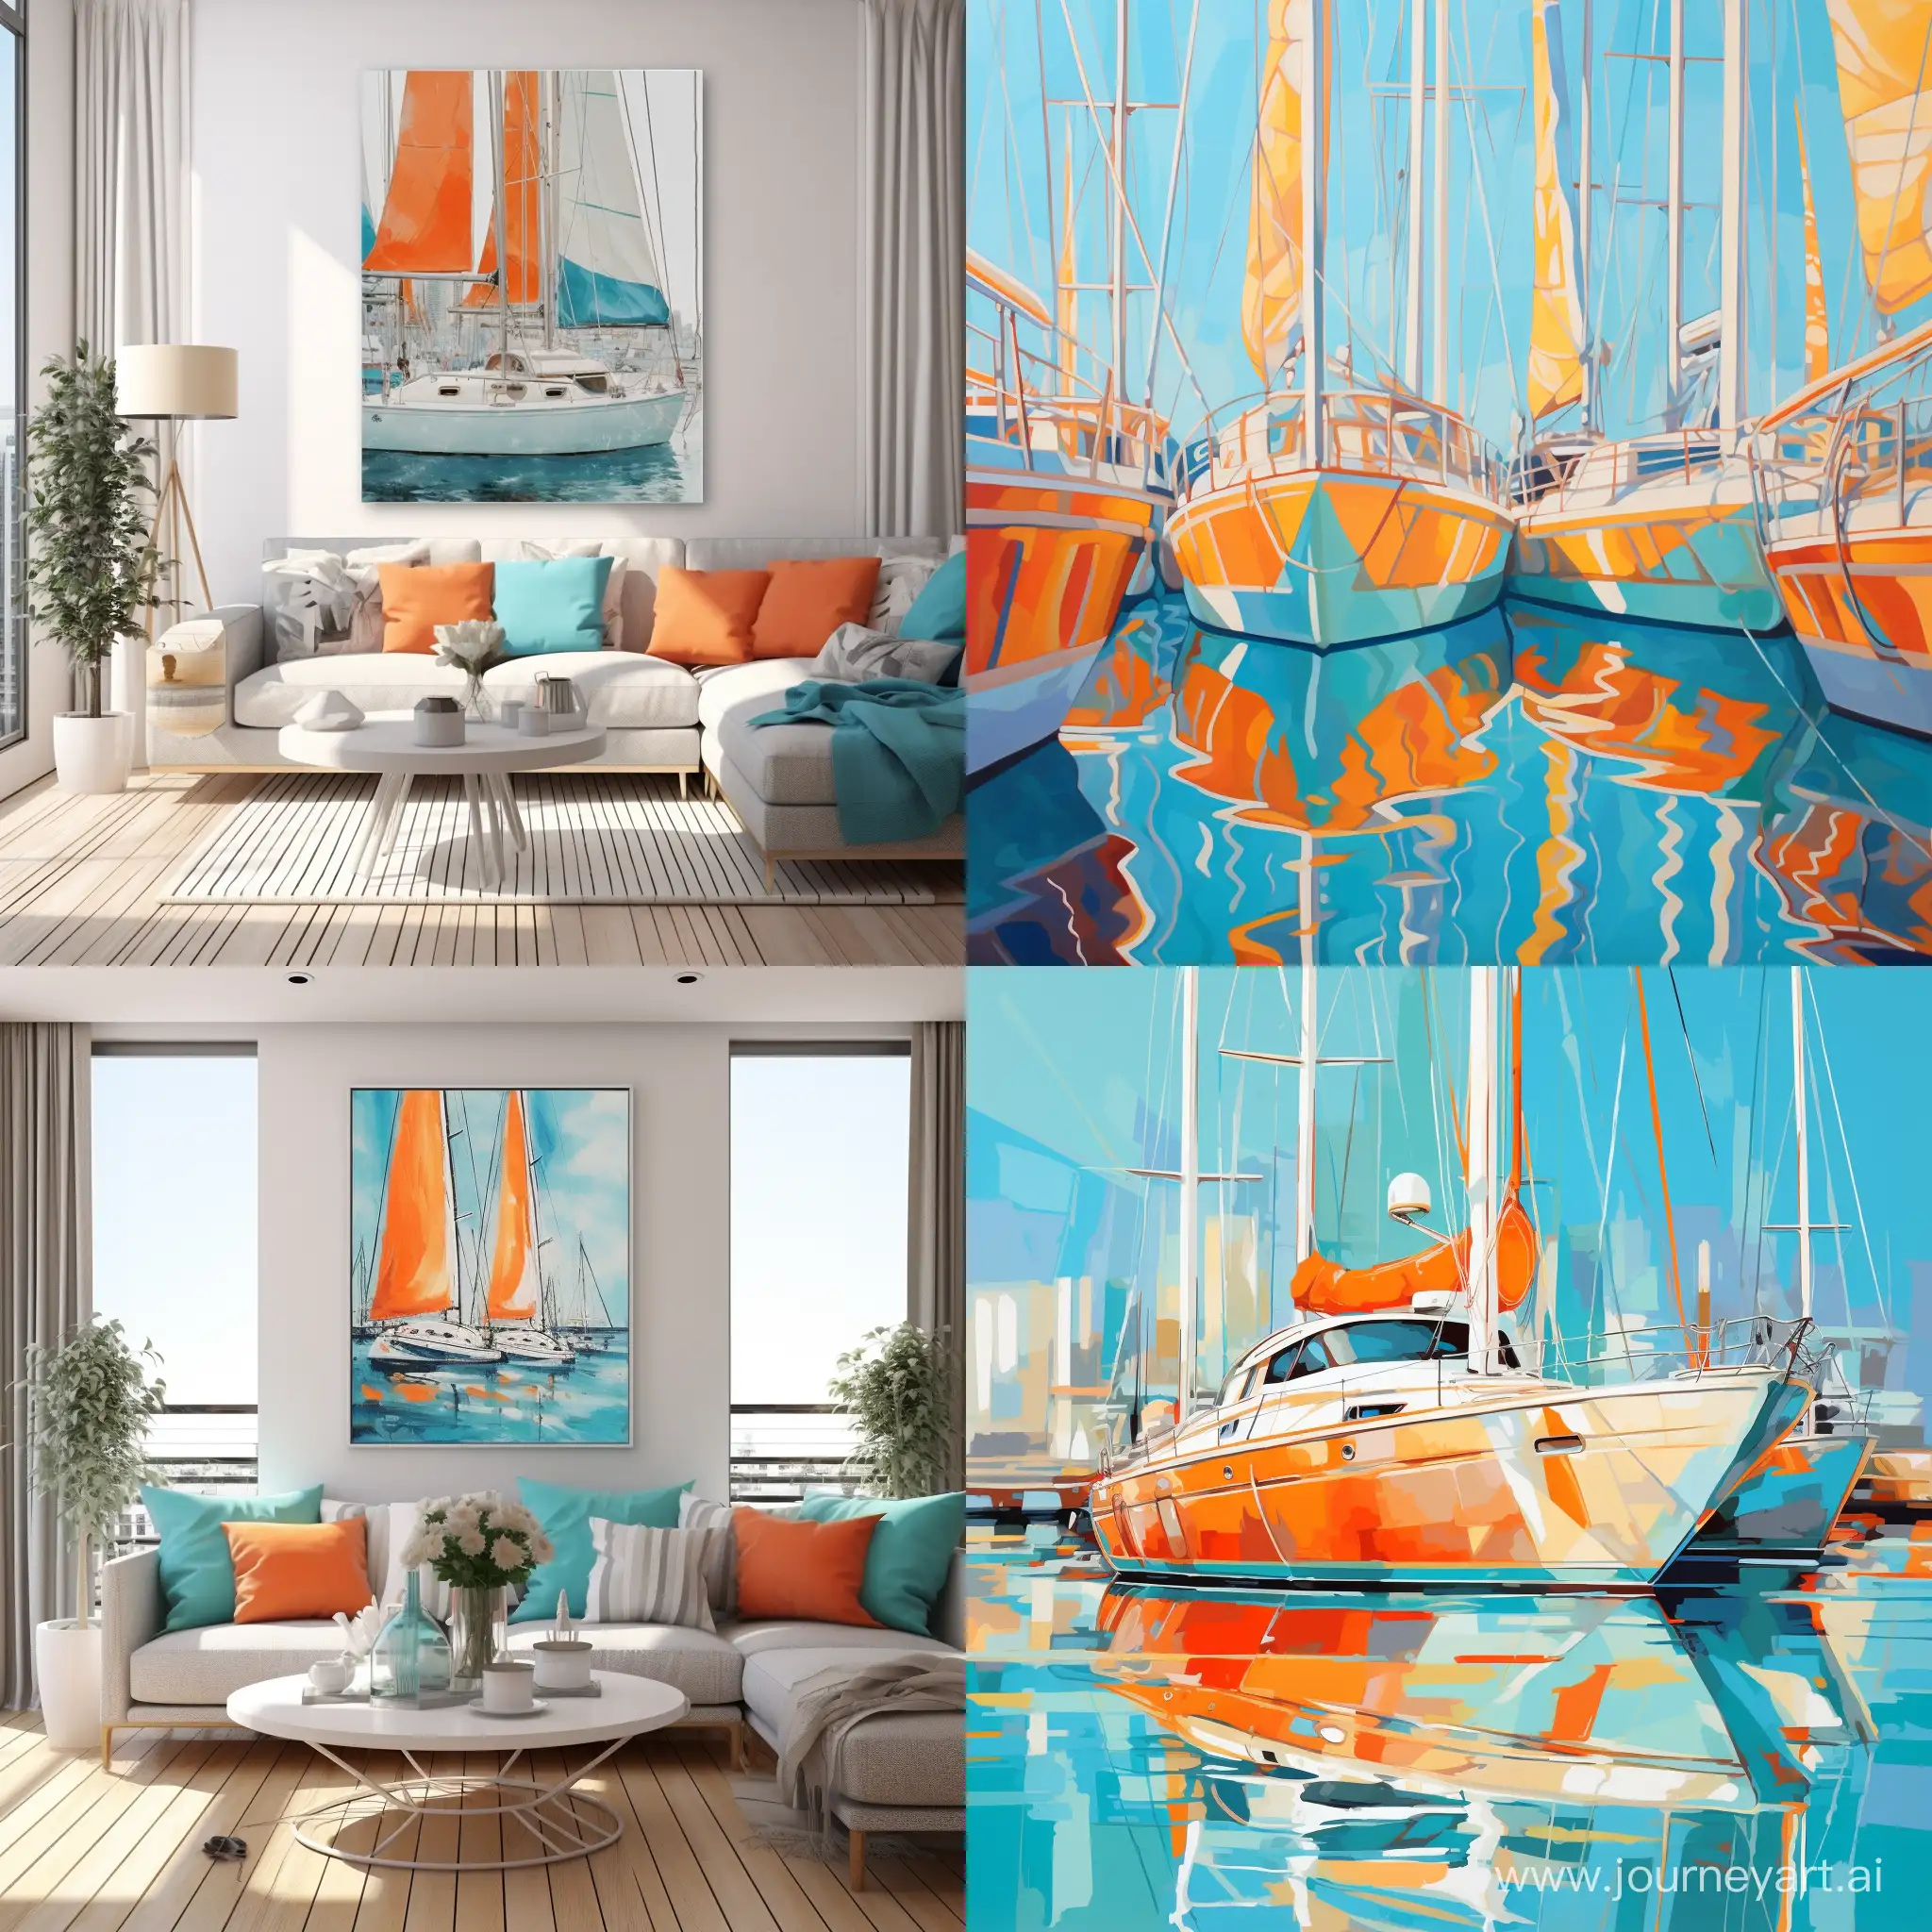 Vibrant-Yachts-in-Turquoise-Marina-A-Contemporary-Art-Masterpiece-by-Karen-Stamper